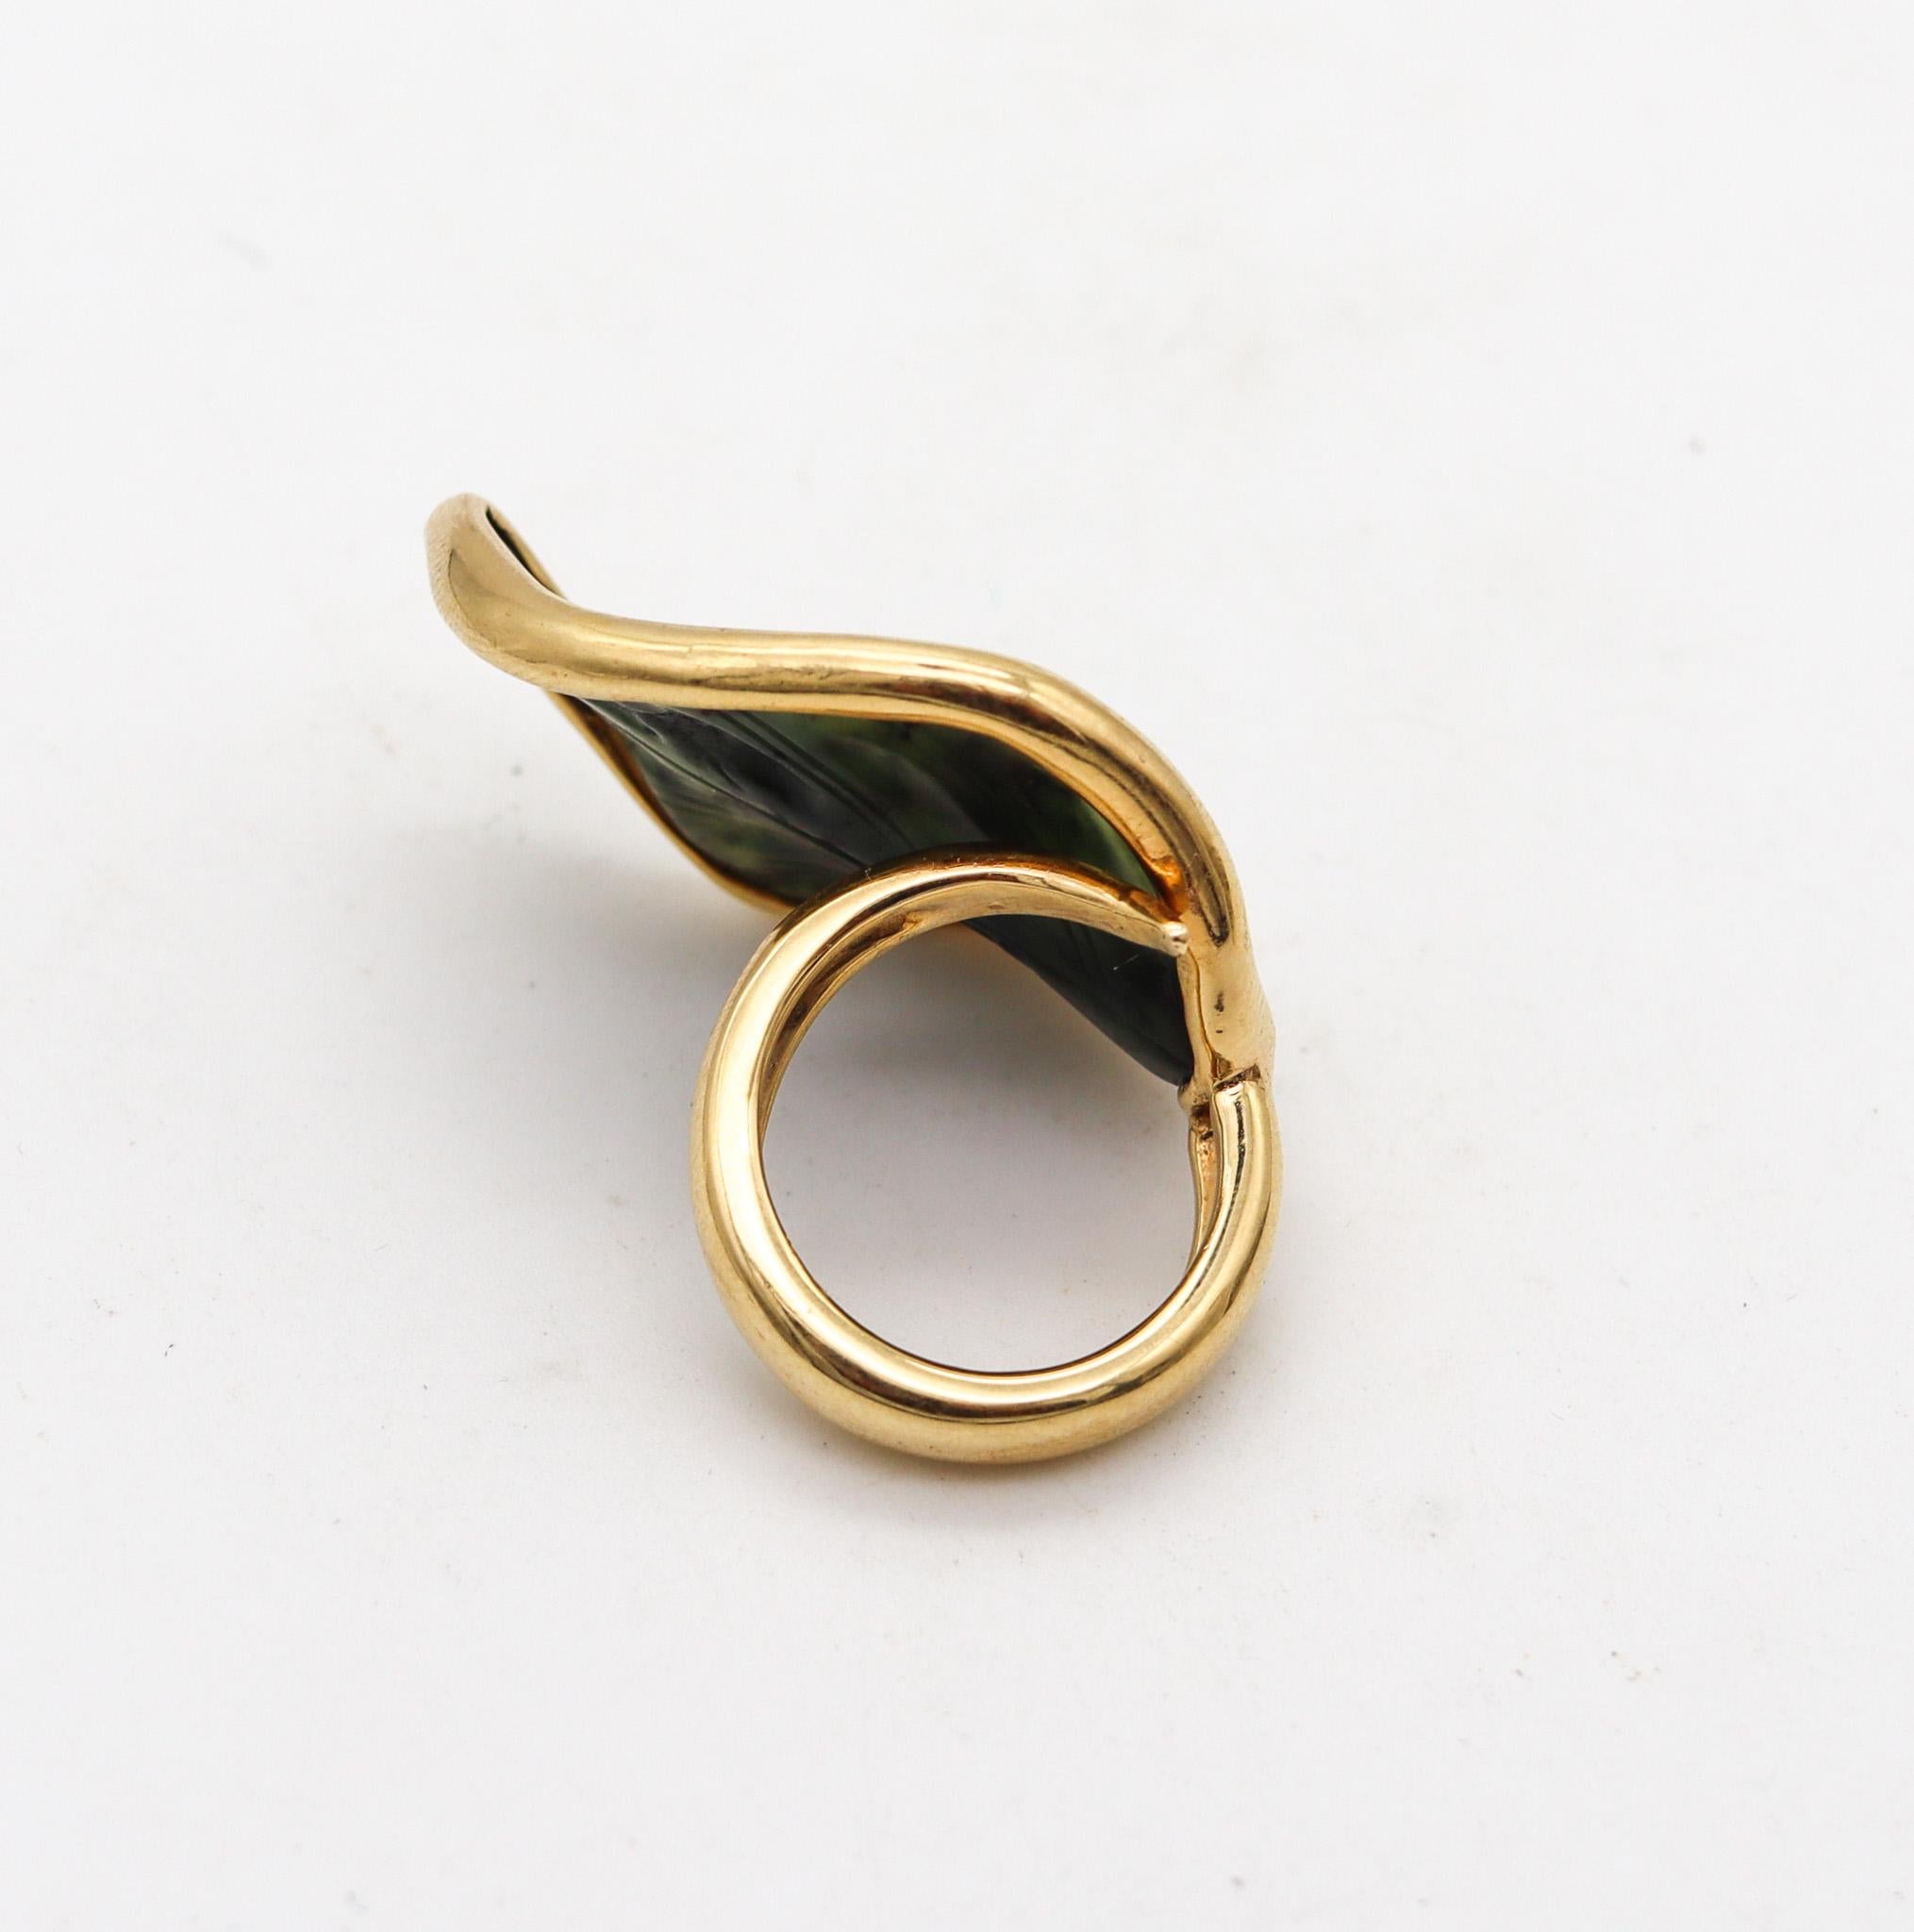 A sculptural bird ring designed by Rebecca Koven.

Gorgeous contemporary ring, created in the city of New York by the very talented jewelry designer Rebecca Koven. This free form cocktail ring has been carefully crafted as a one of a kind piece in